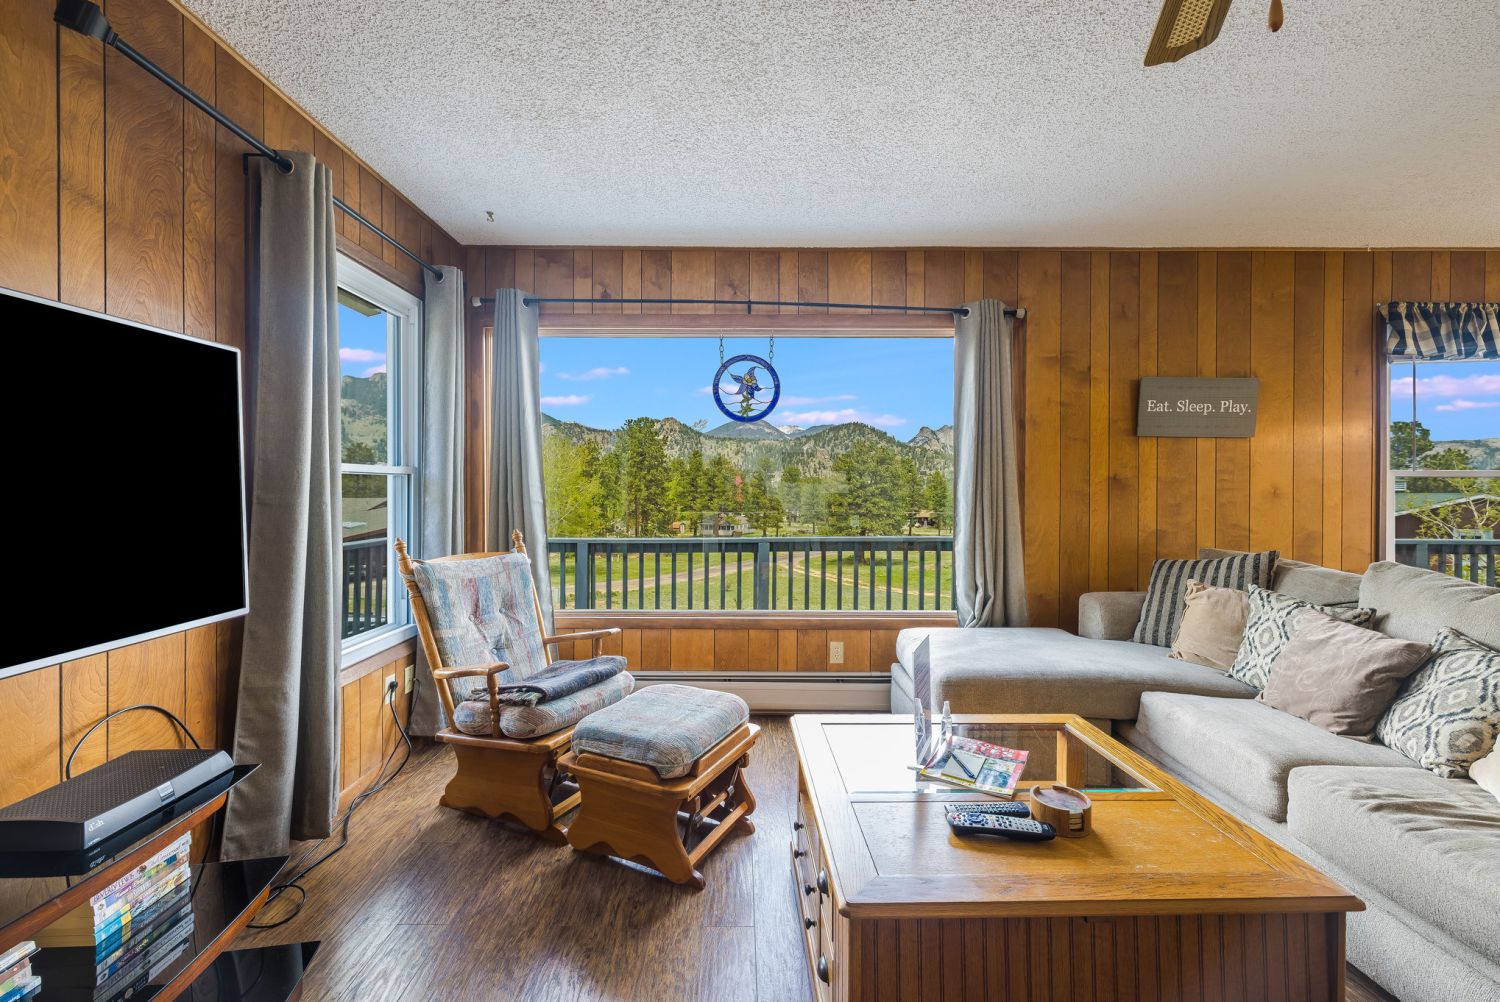 Grandma's Mountain Getaway - Living room with a sectional couch, rocking chair and ottoman, flat screen TV and a large window with beautiful mountain views